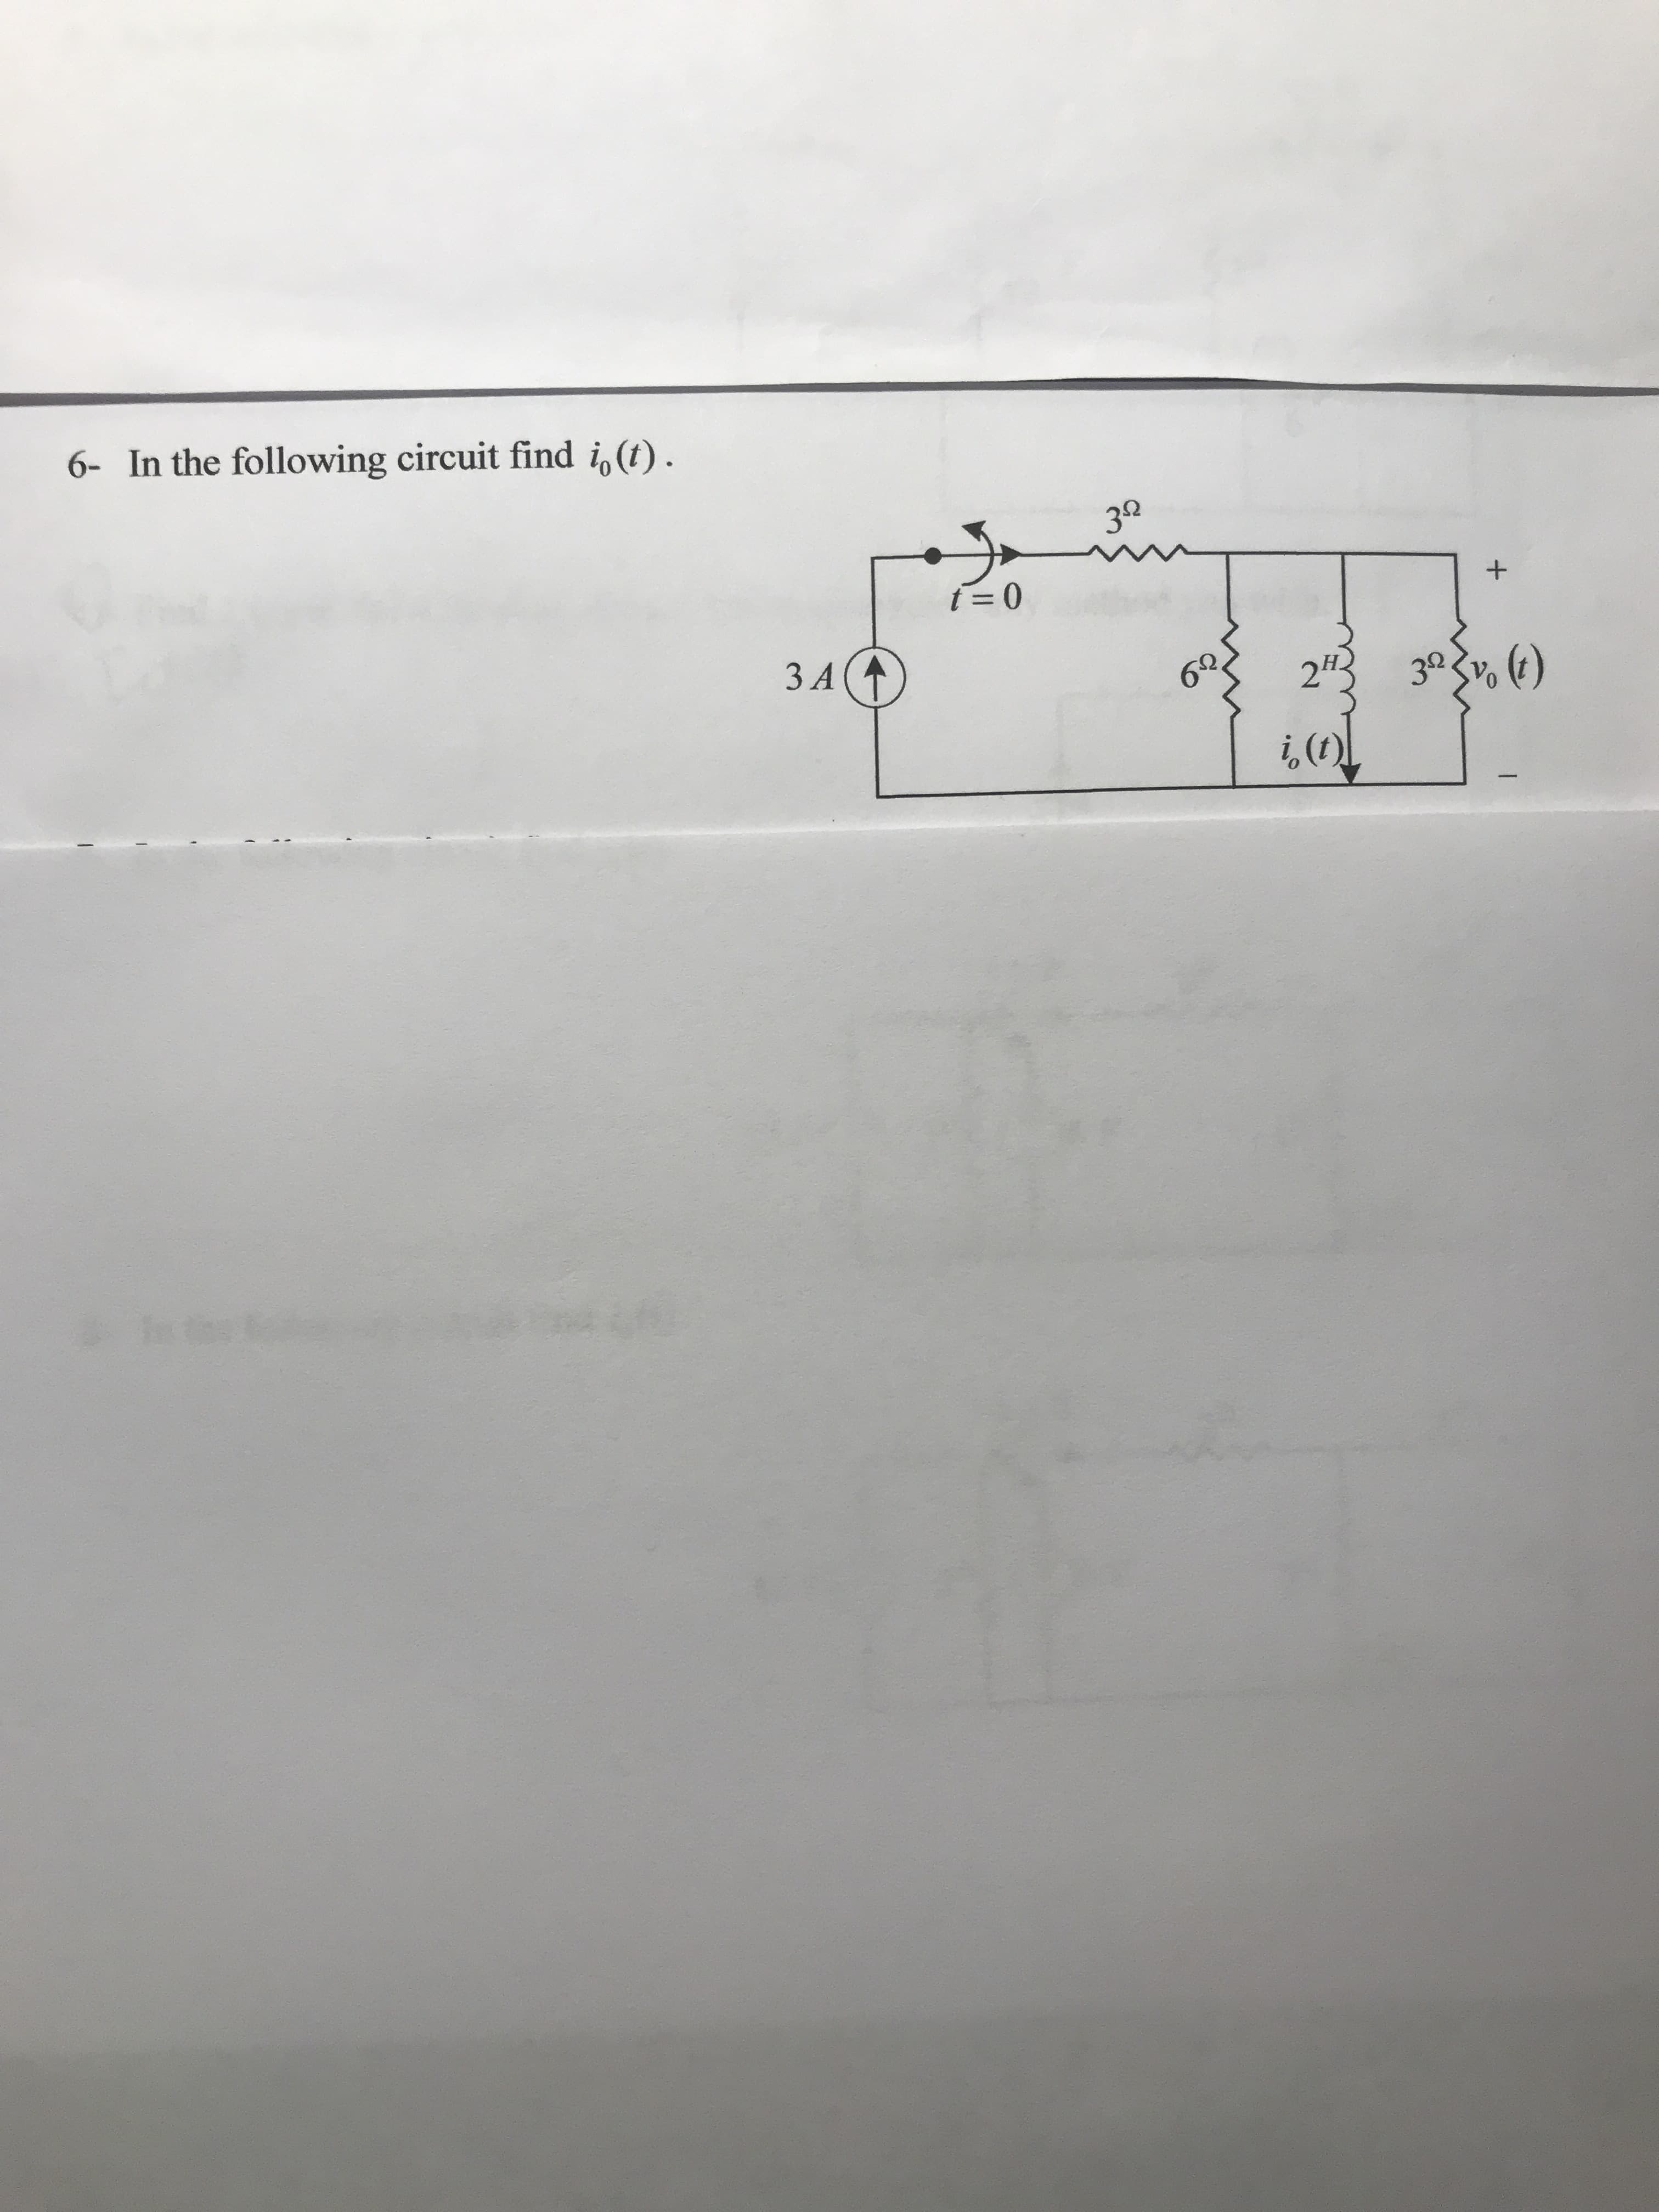 6- In the following circuit find io (t)
t-0
3 A
i, (t)
